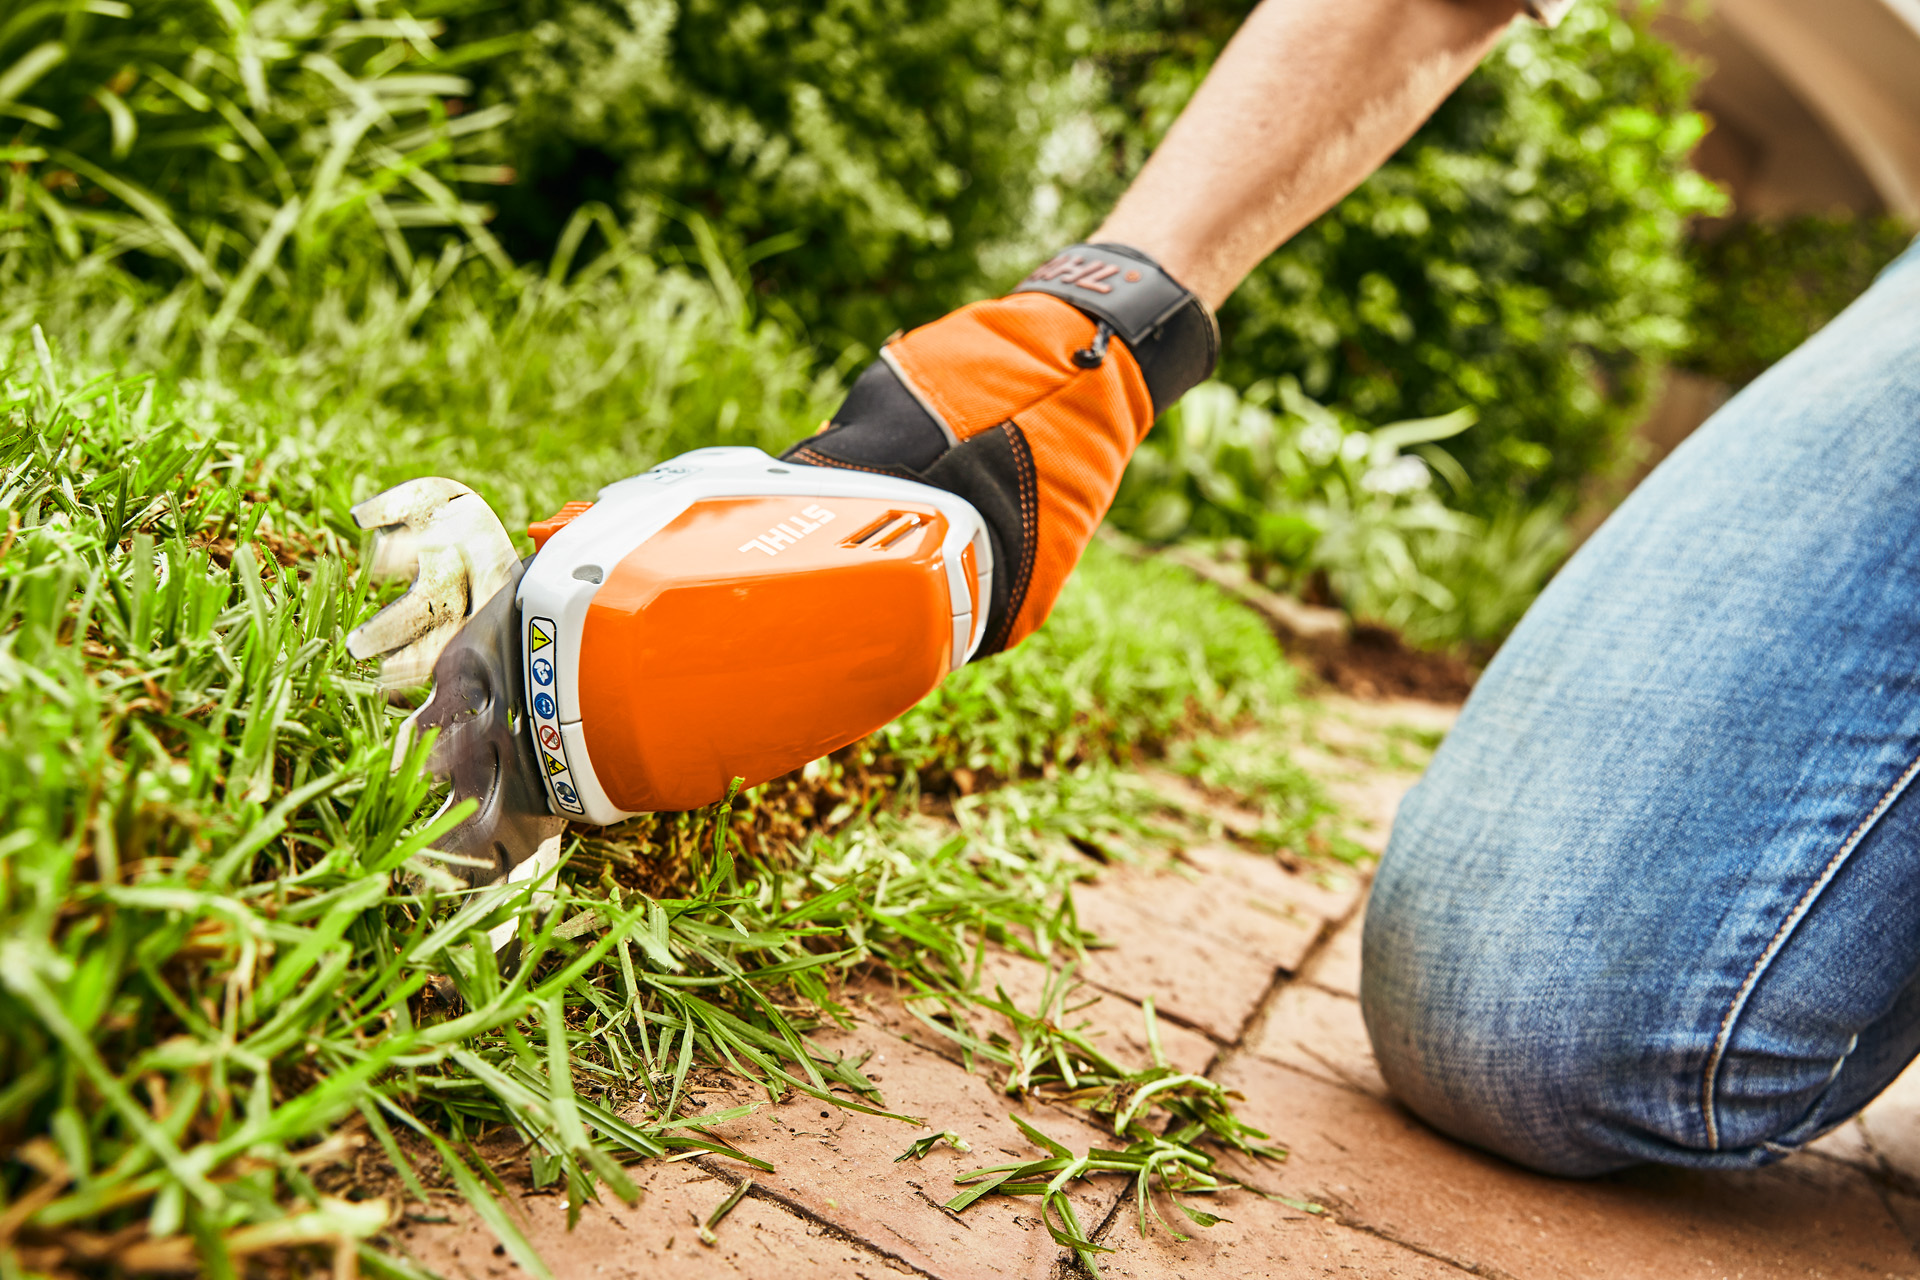 Cutting lawn edges with a current bestseller: the STIHL HSA 26 battery-powered shrub shears